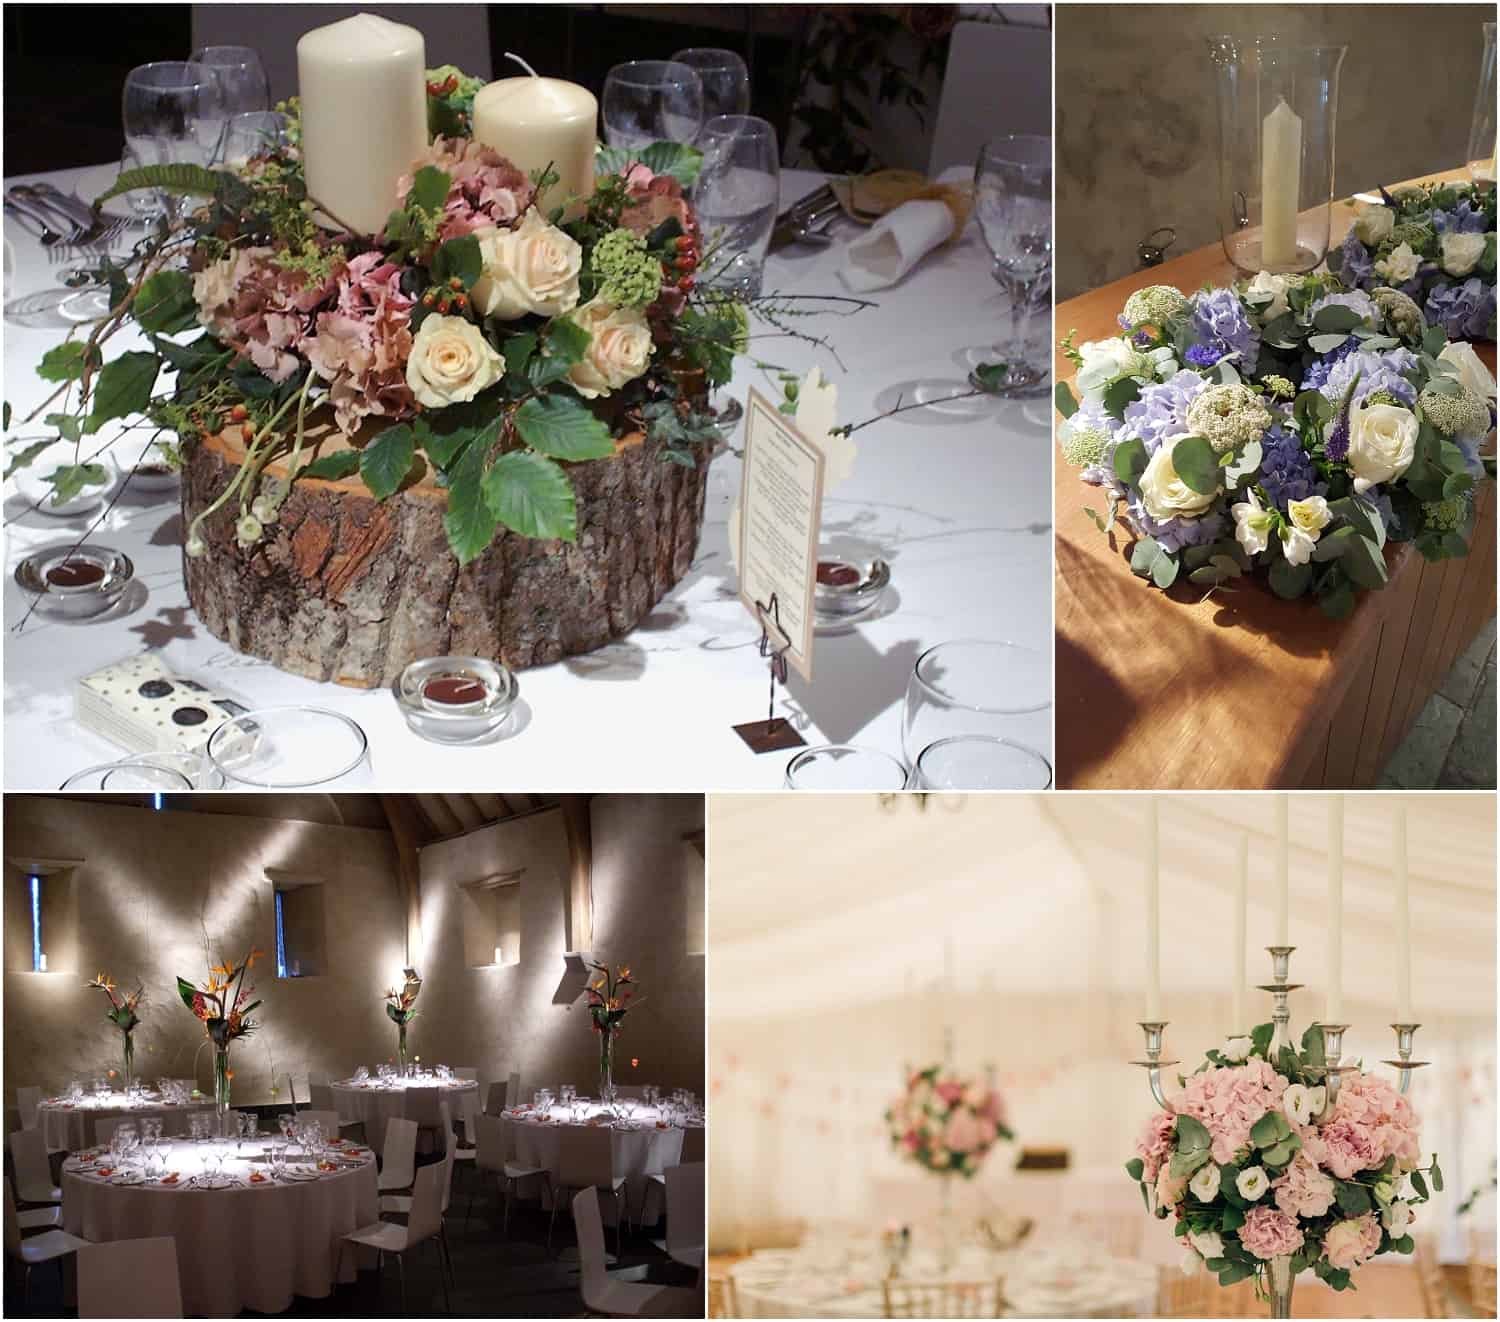 Table centres using flowers, candles and other natural inspirations. By Sarah Pepper